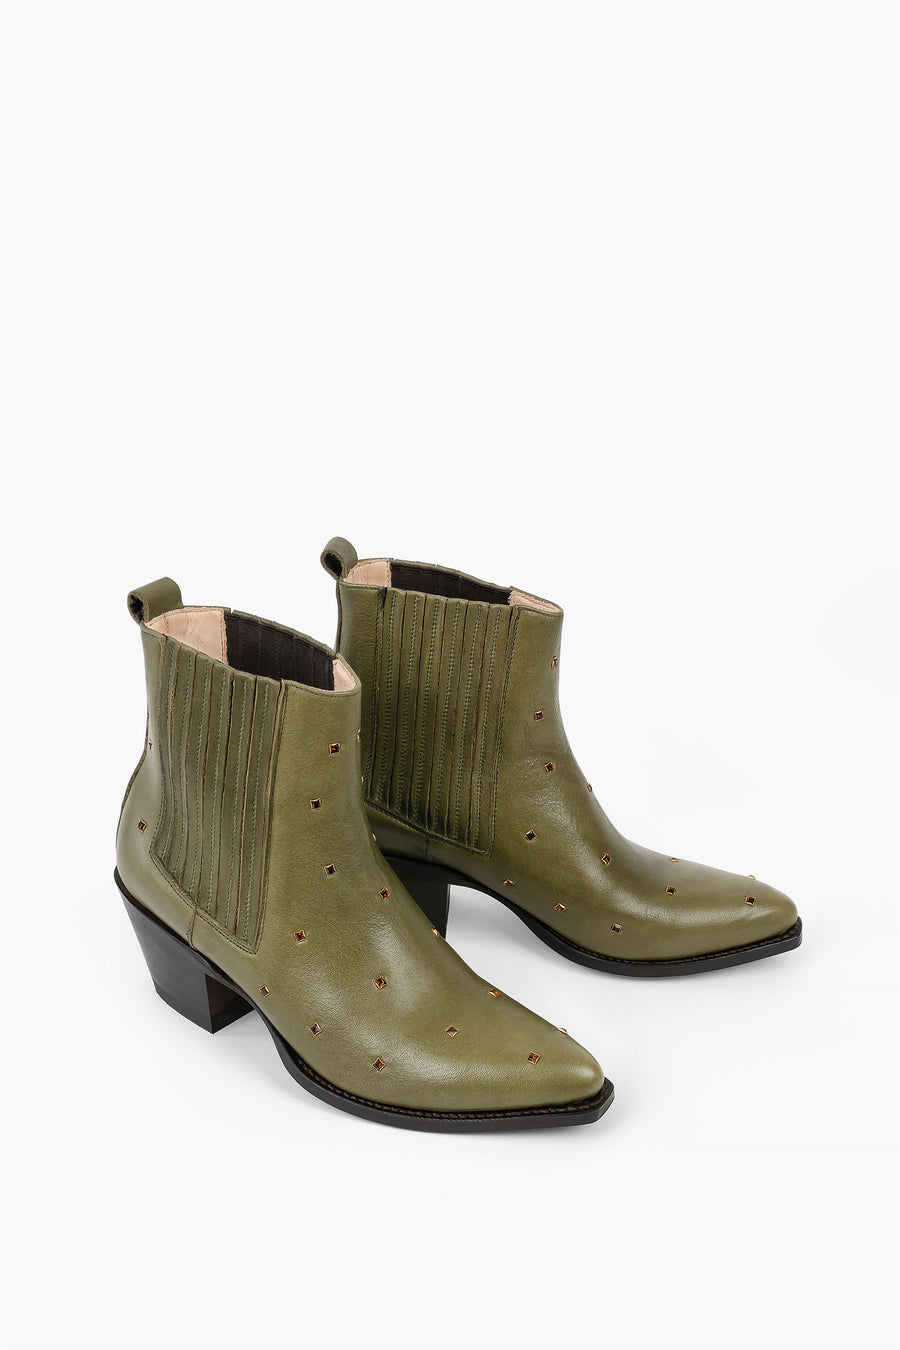 Sustainable, goodyear-welted boots made in Spain. 